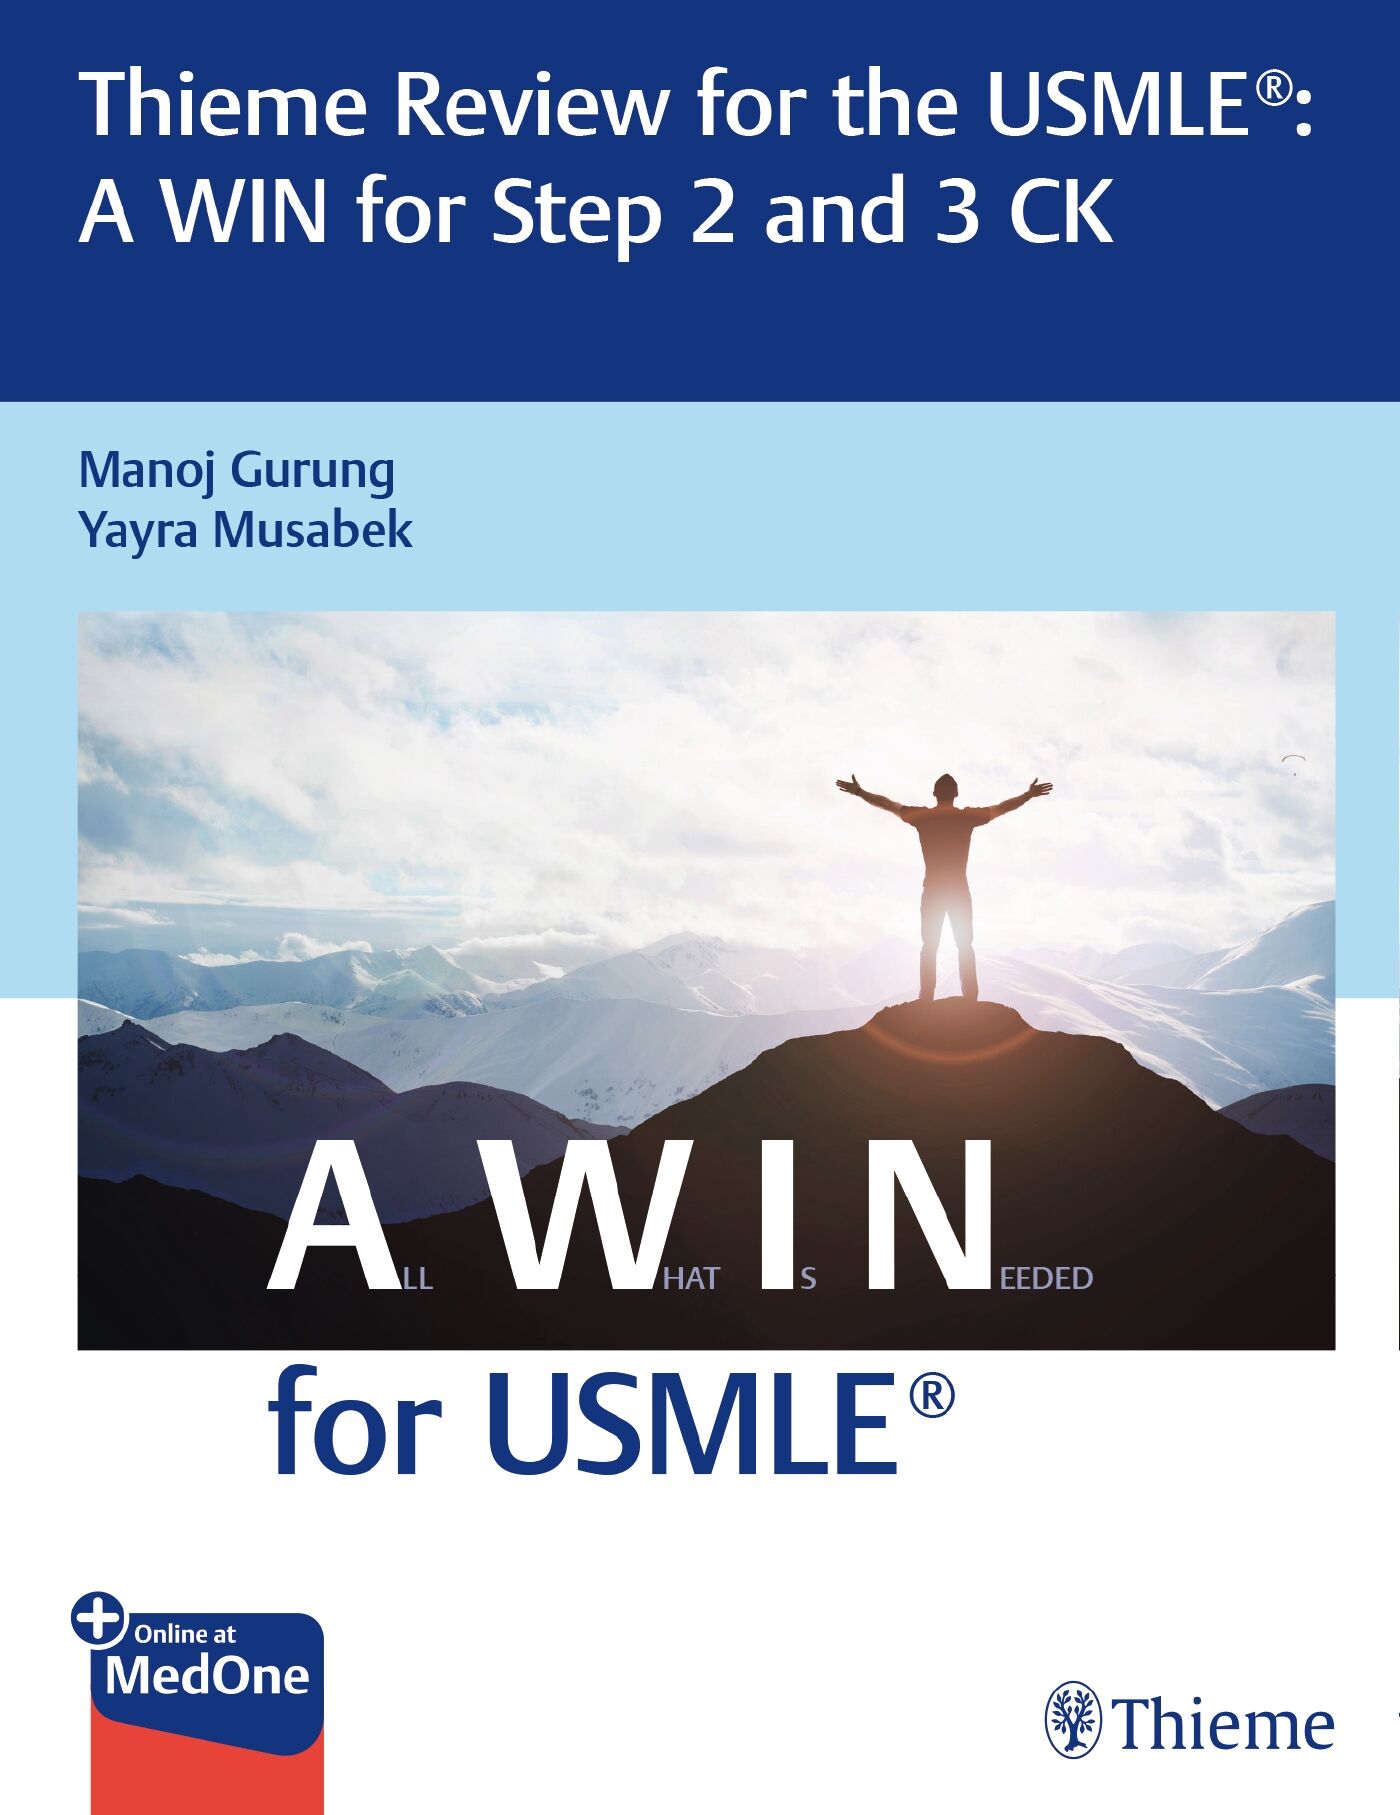 Thieme Review for the USMLE®: A WIN for Step 2 and 3 CK, 9781626239258